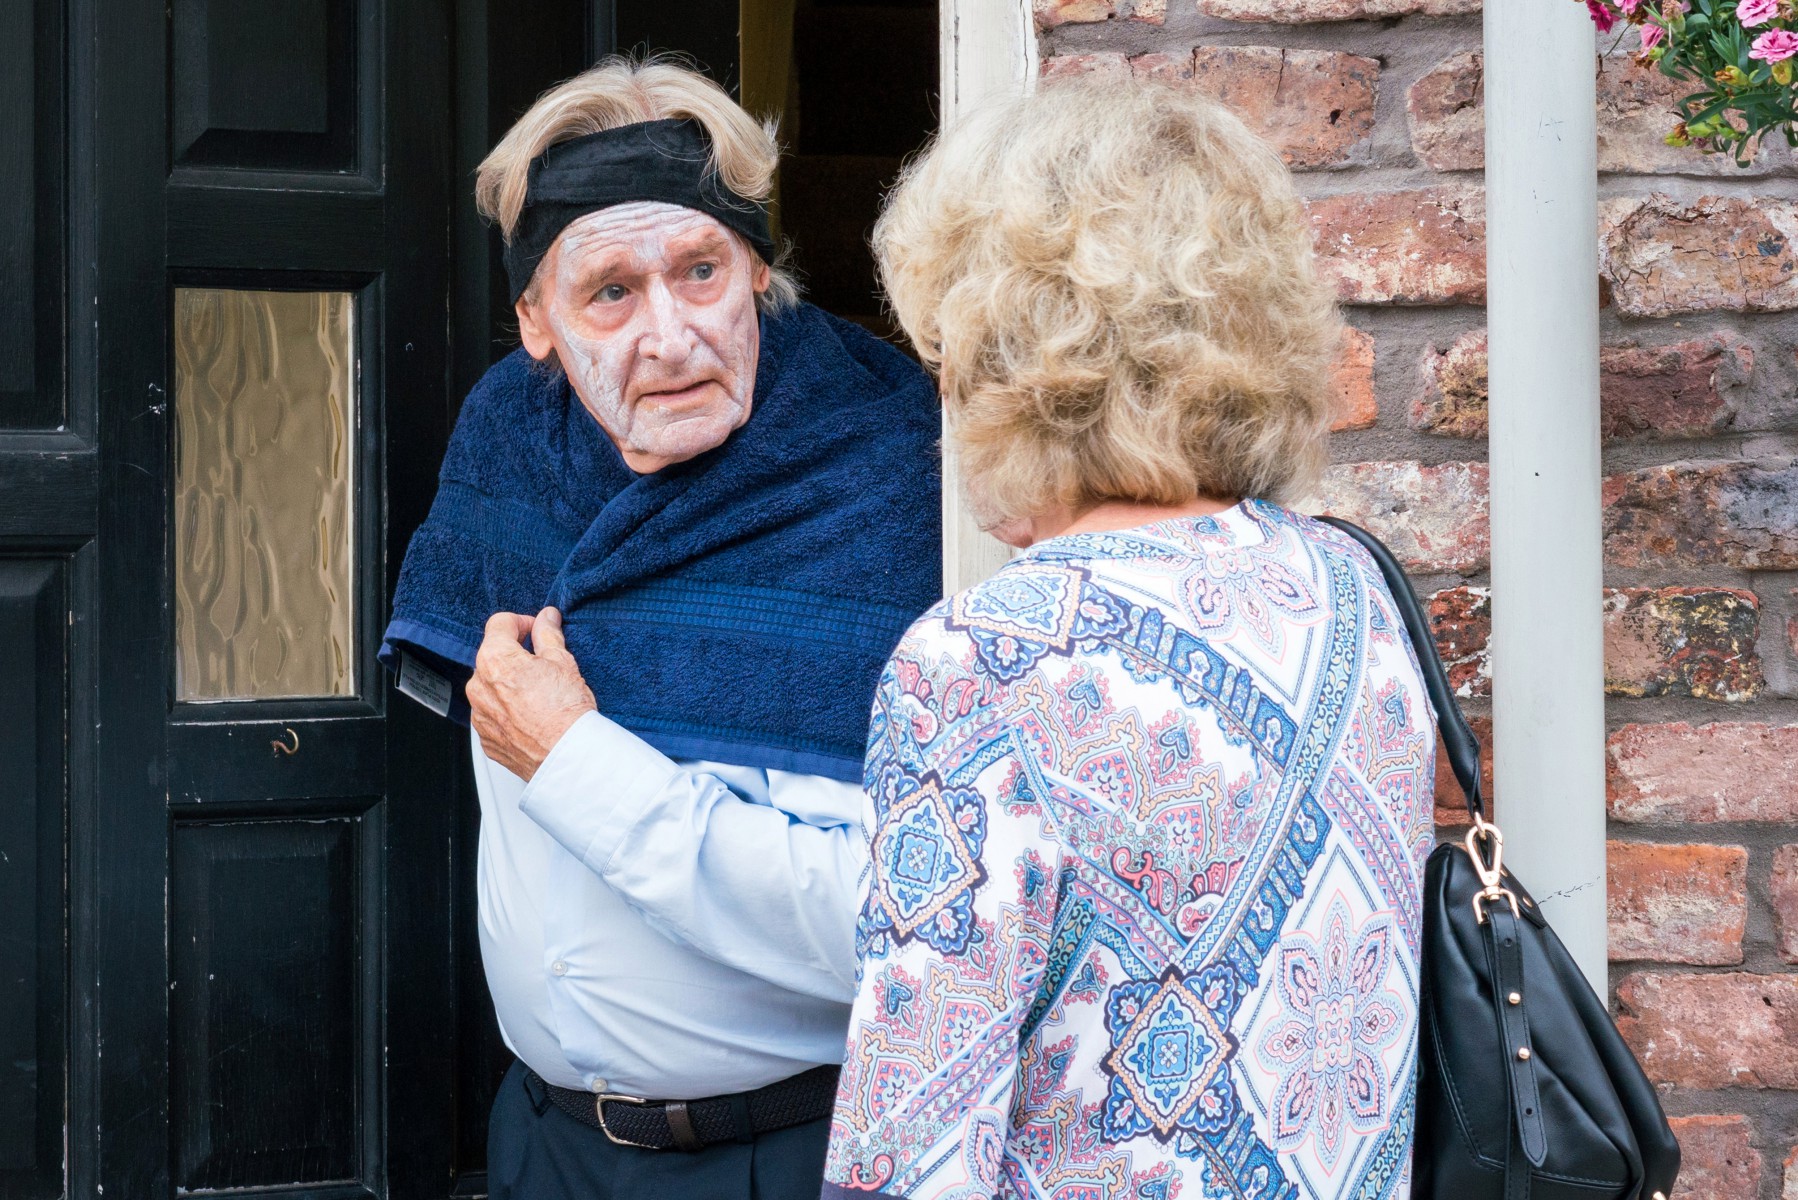 Coronation Street icon Bill Roache has spoken out about his character